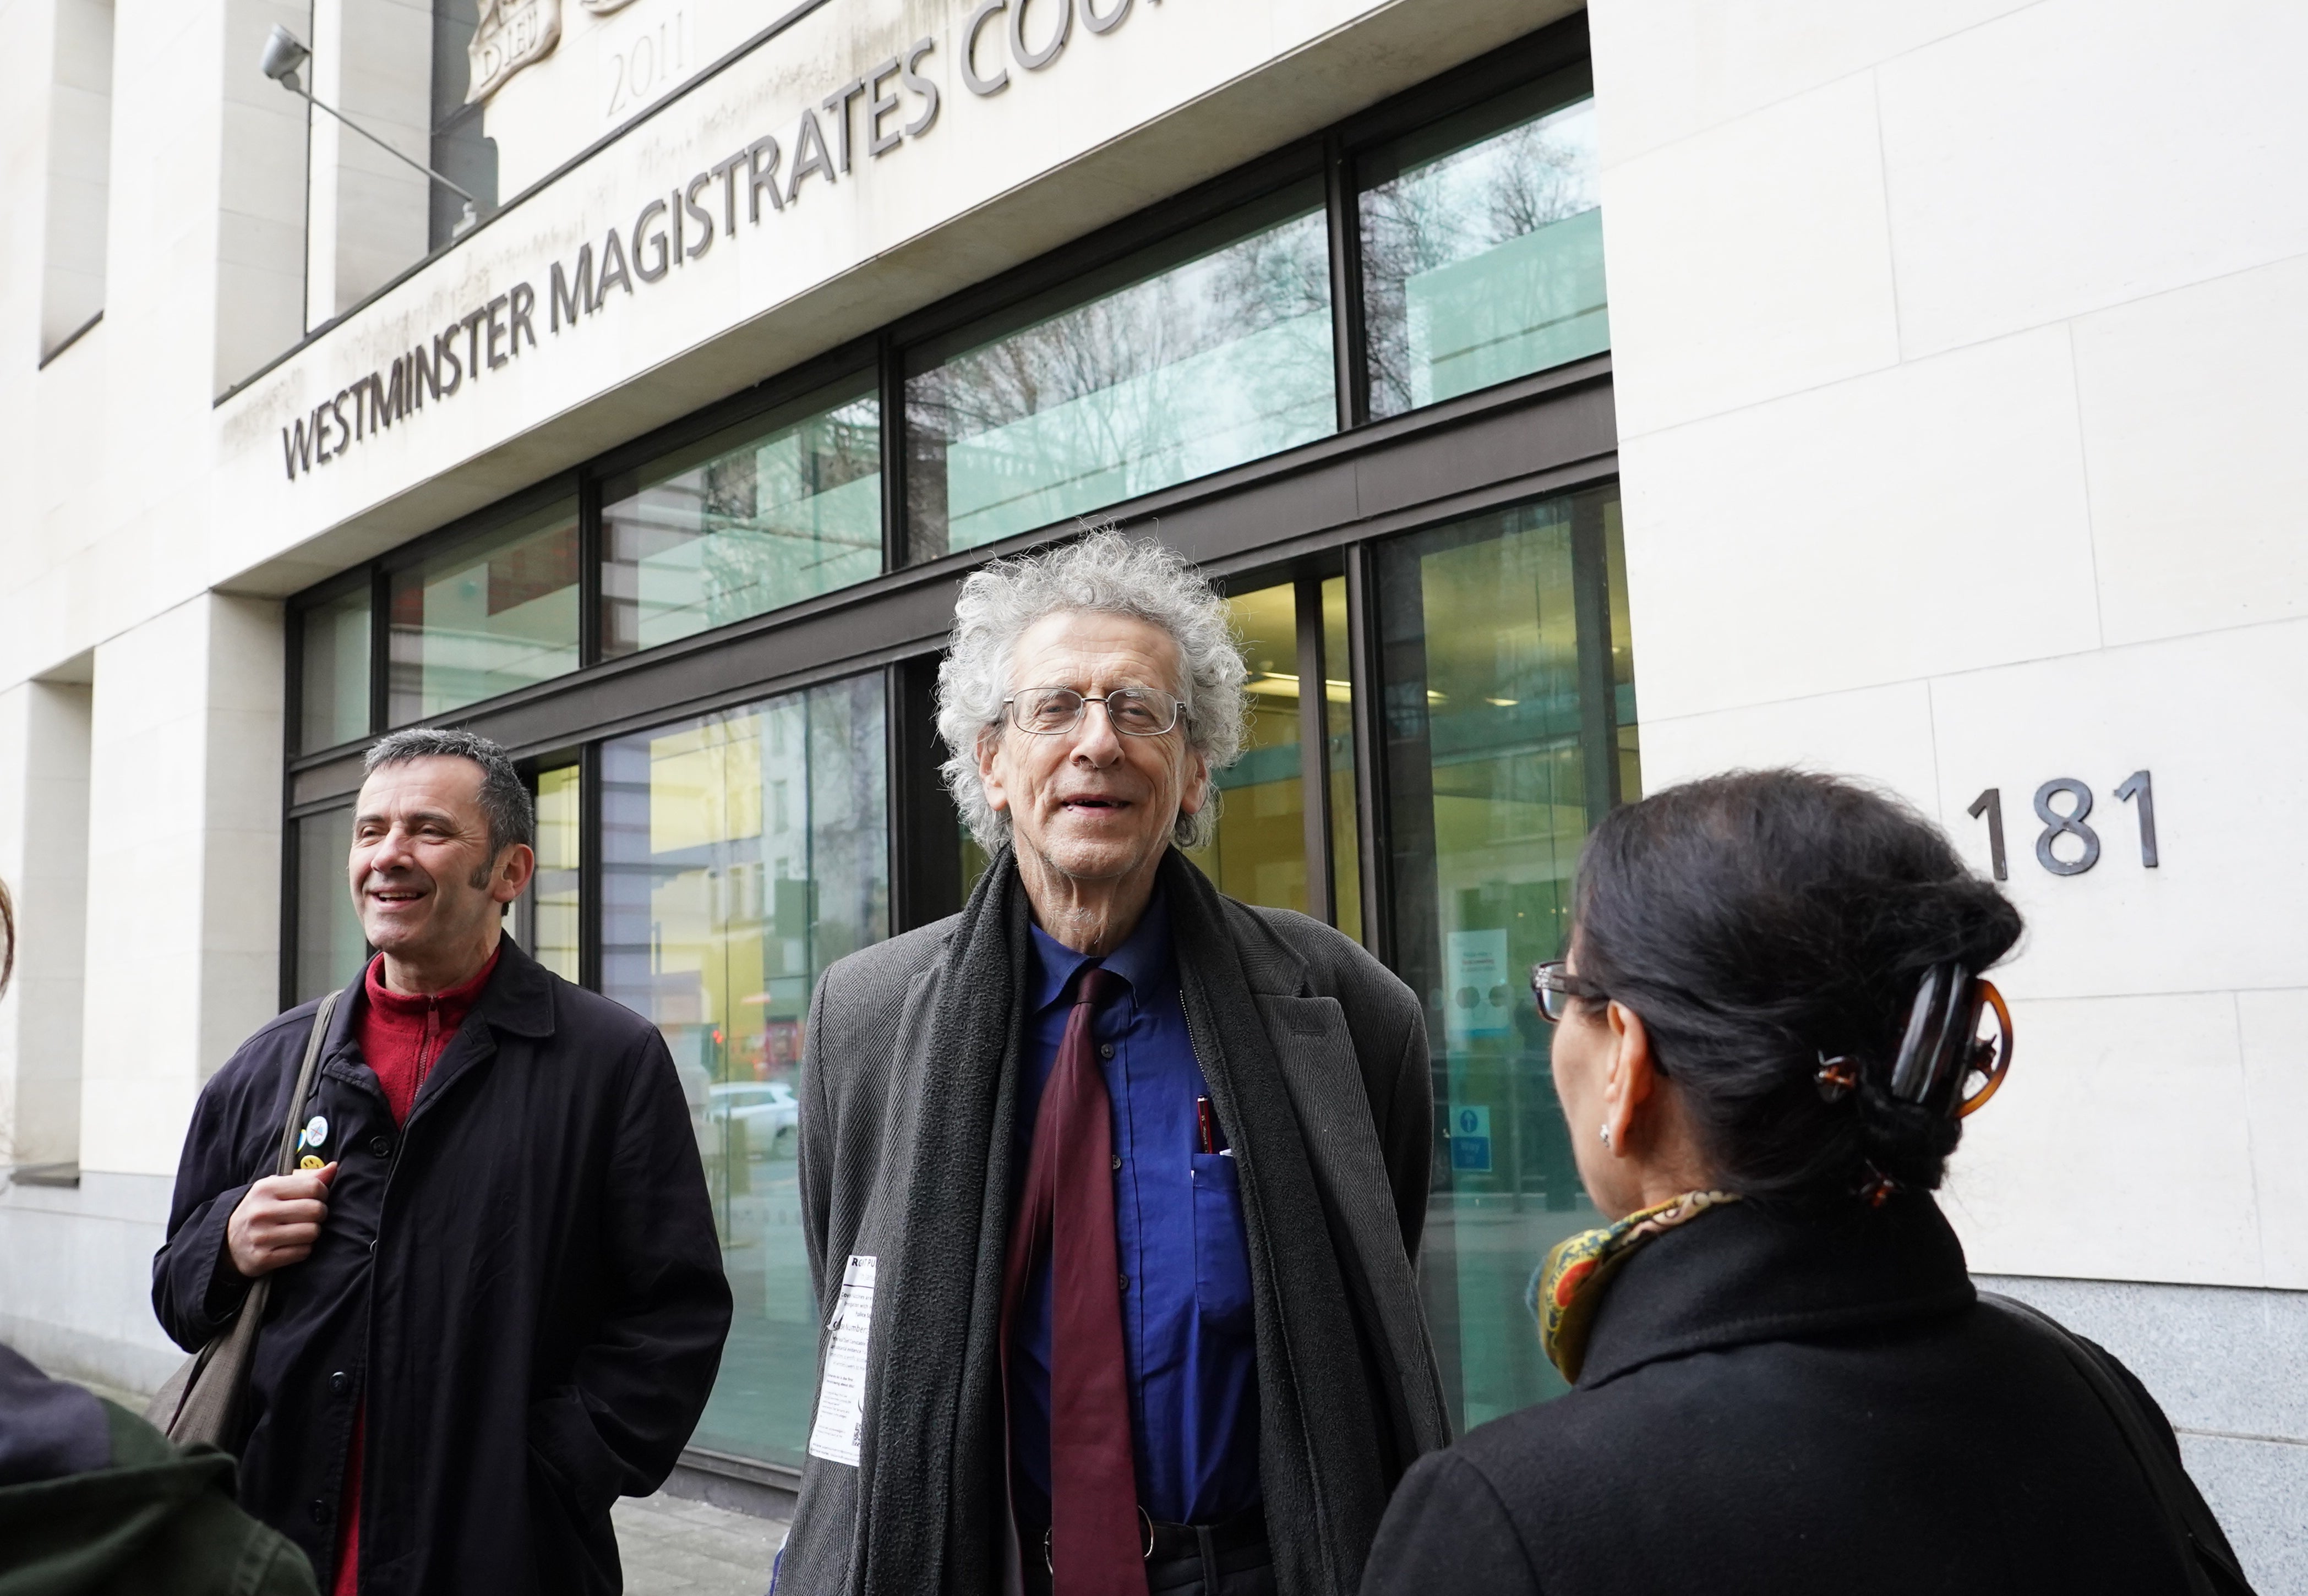 Piers Corbyn (centre) arrives at Westminster Magistrates’ Court (Ian West/PA)